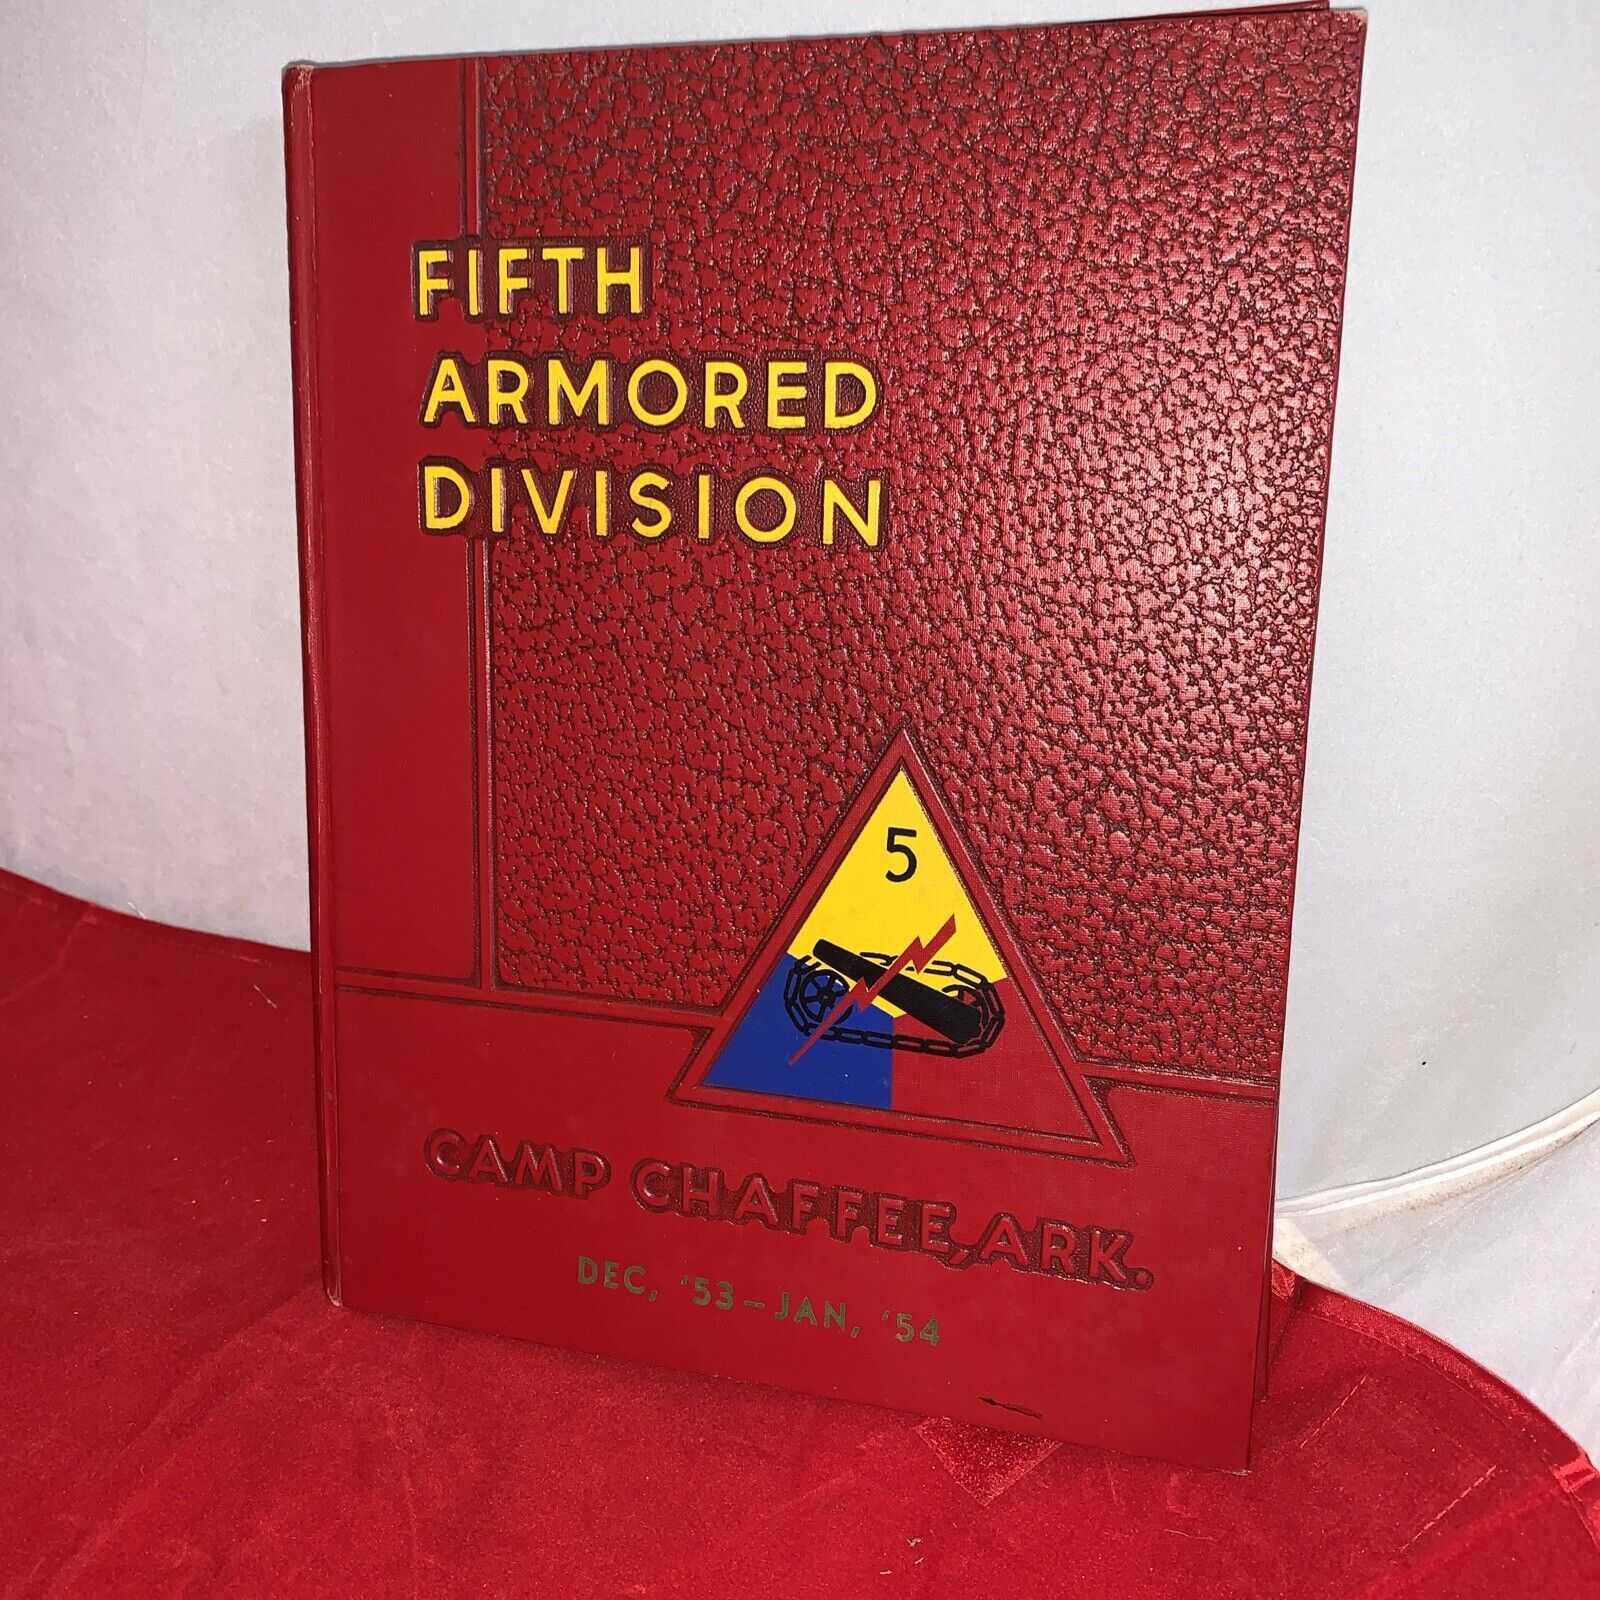 Fifth Armored Division Camp Chaffee Arkansas 1953 Yearbook Dec. 1953- Jan. 1954